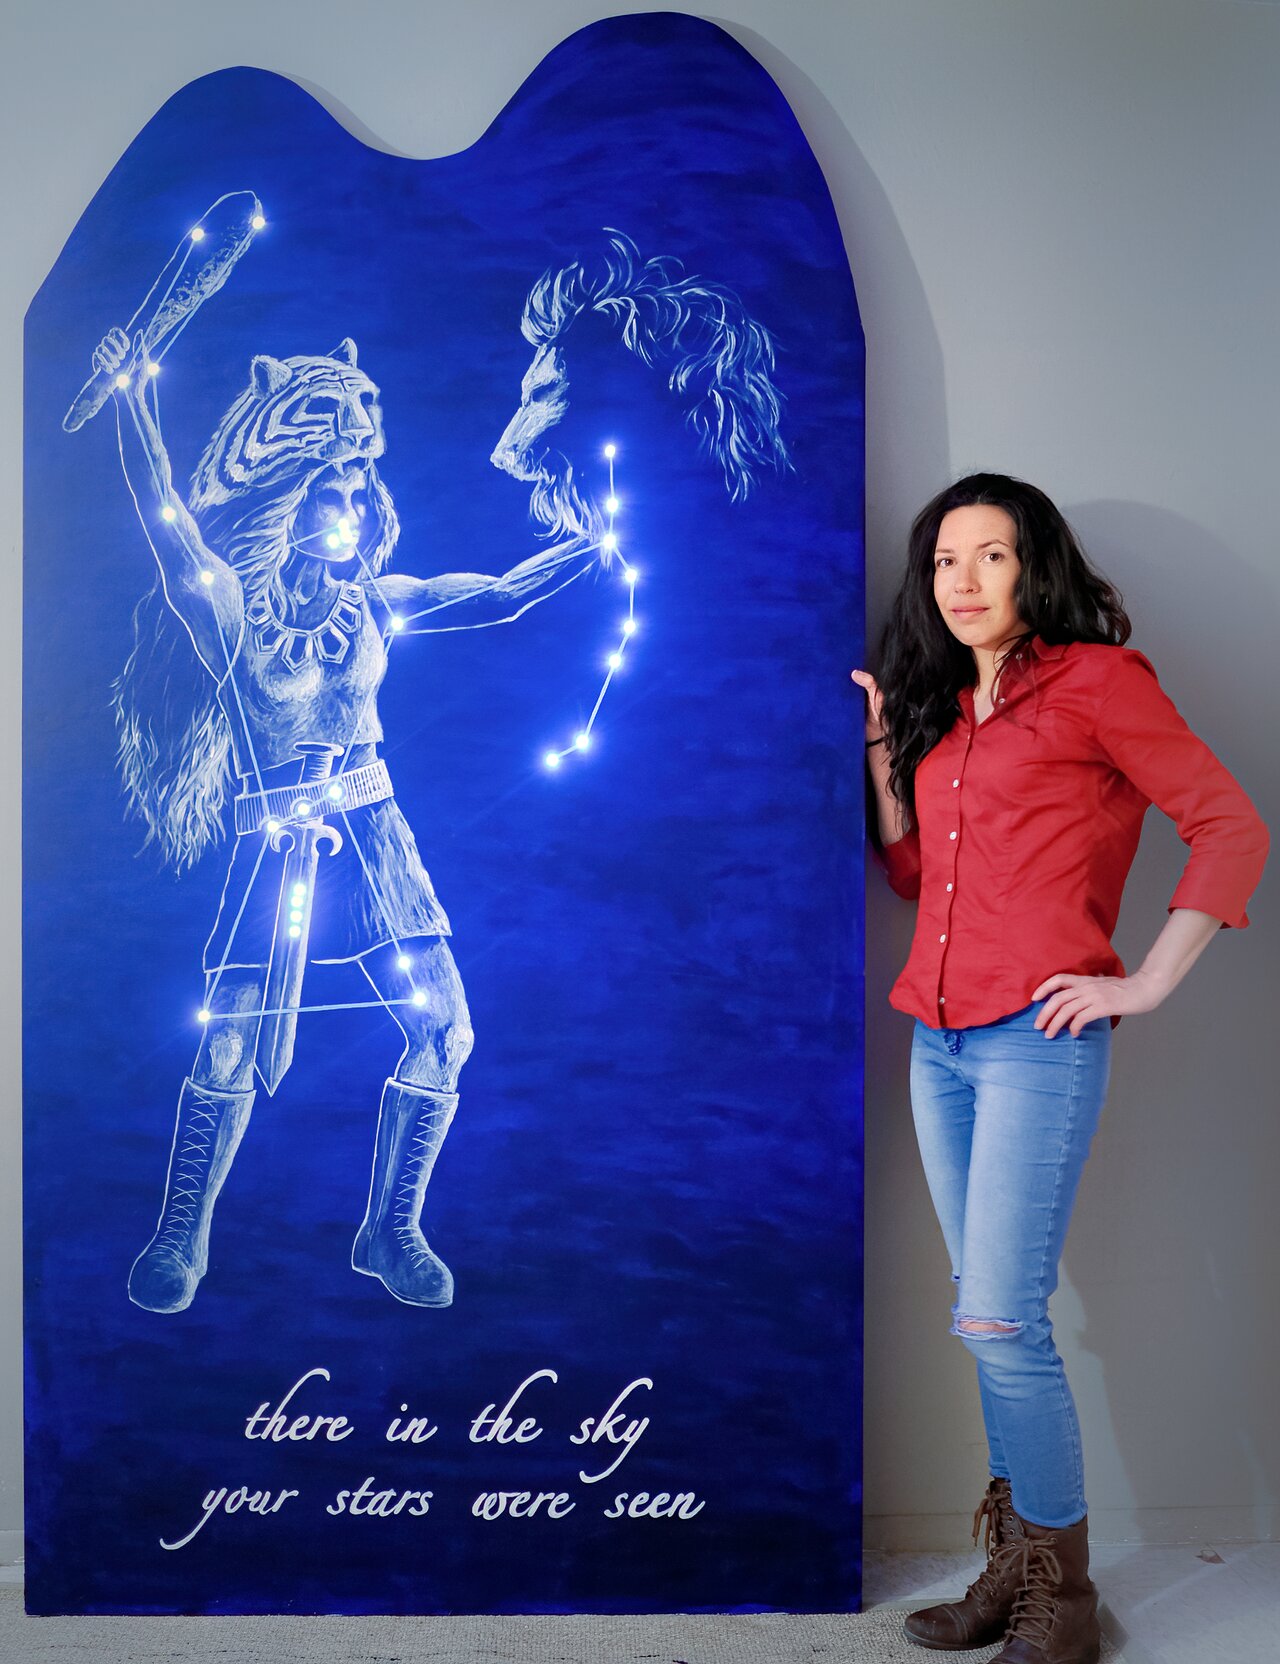 Stéphanie Juneau next to her artwork of Orion as "the huntress"